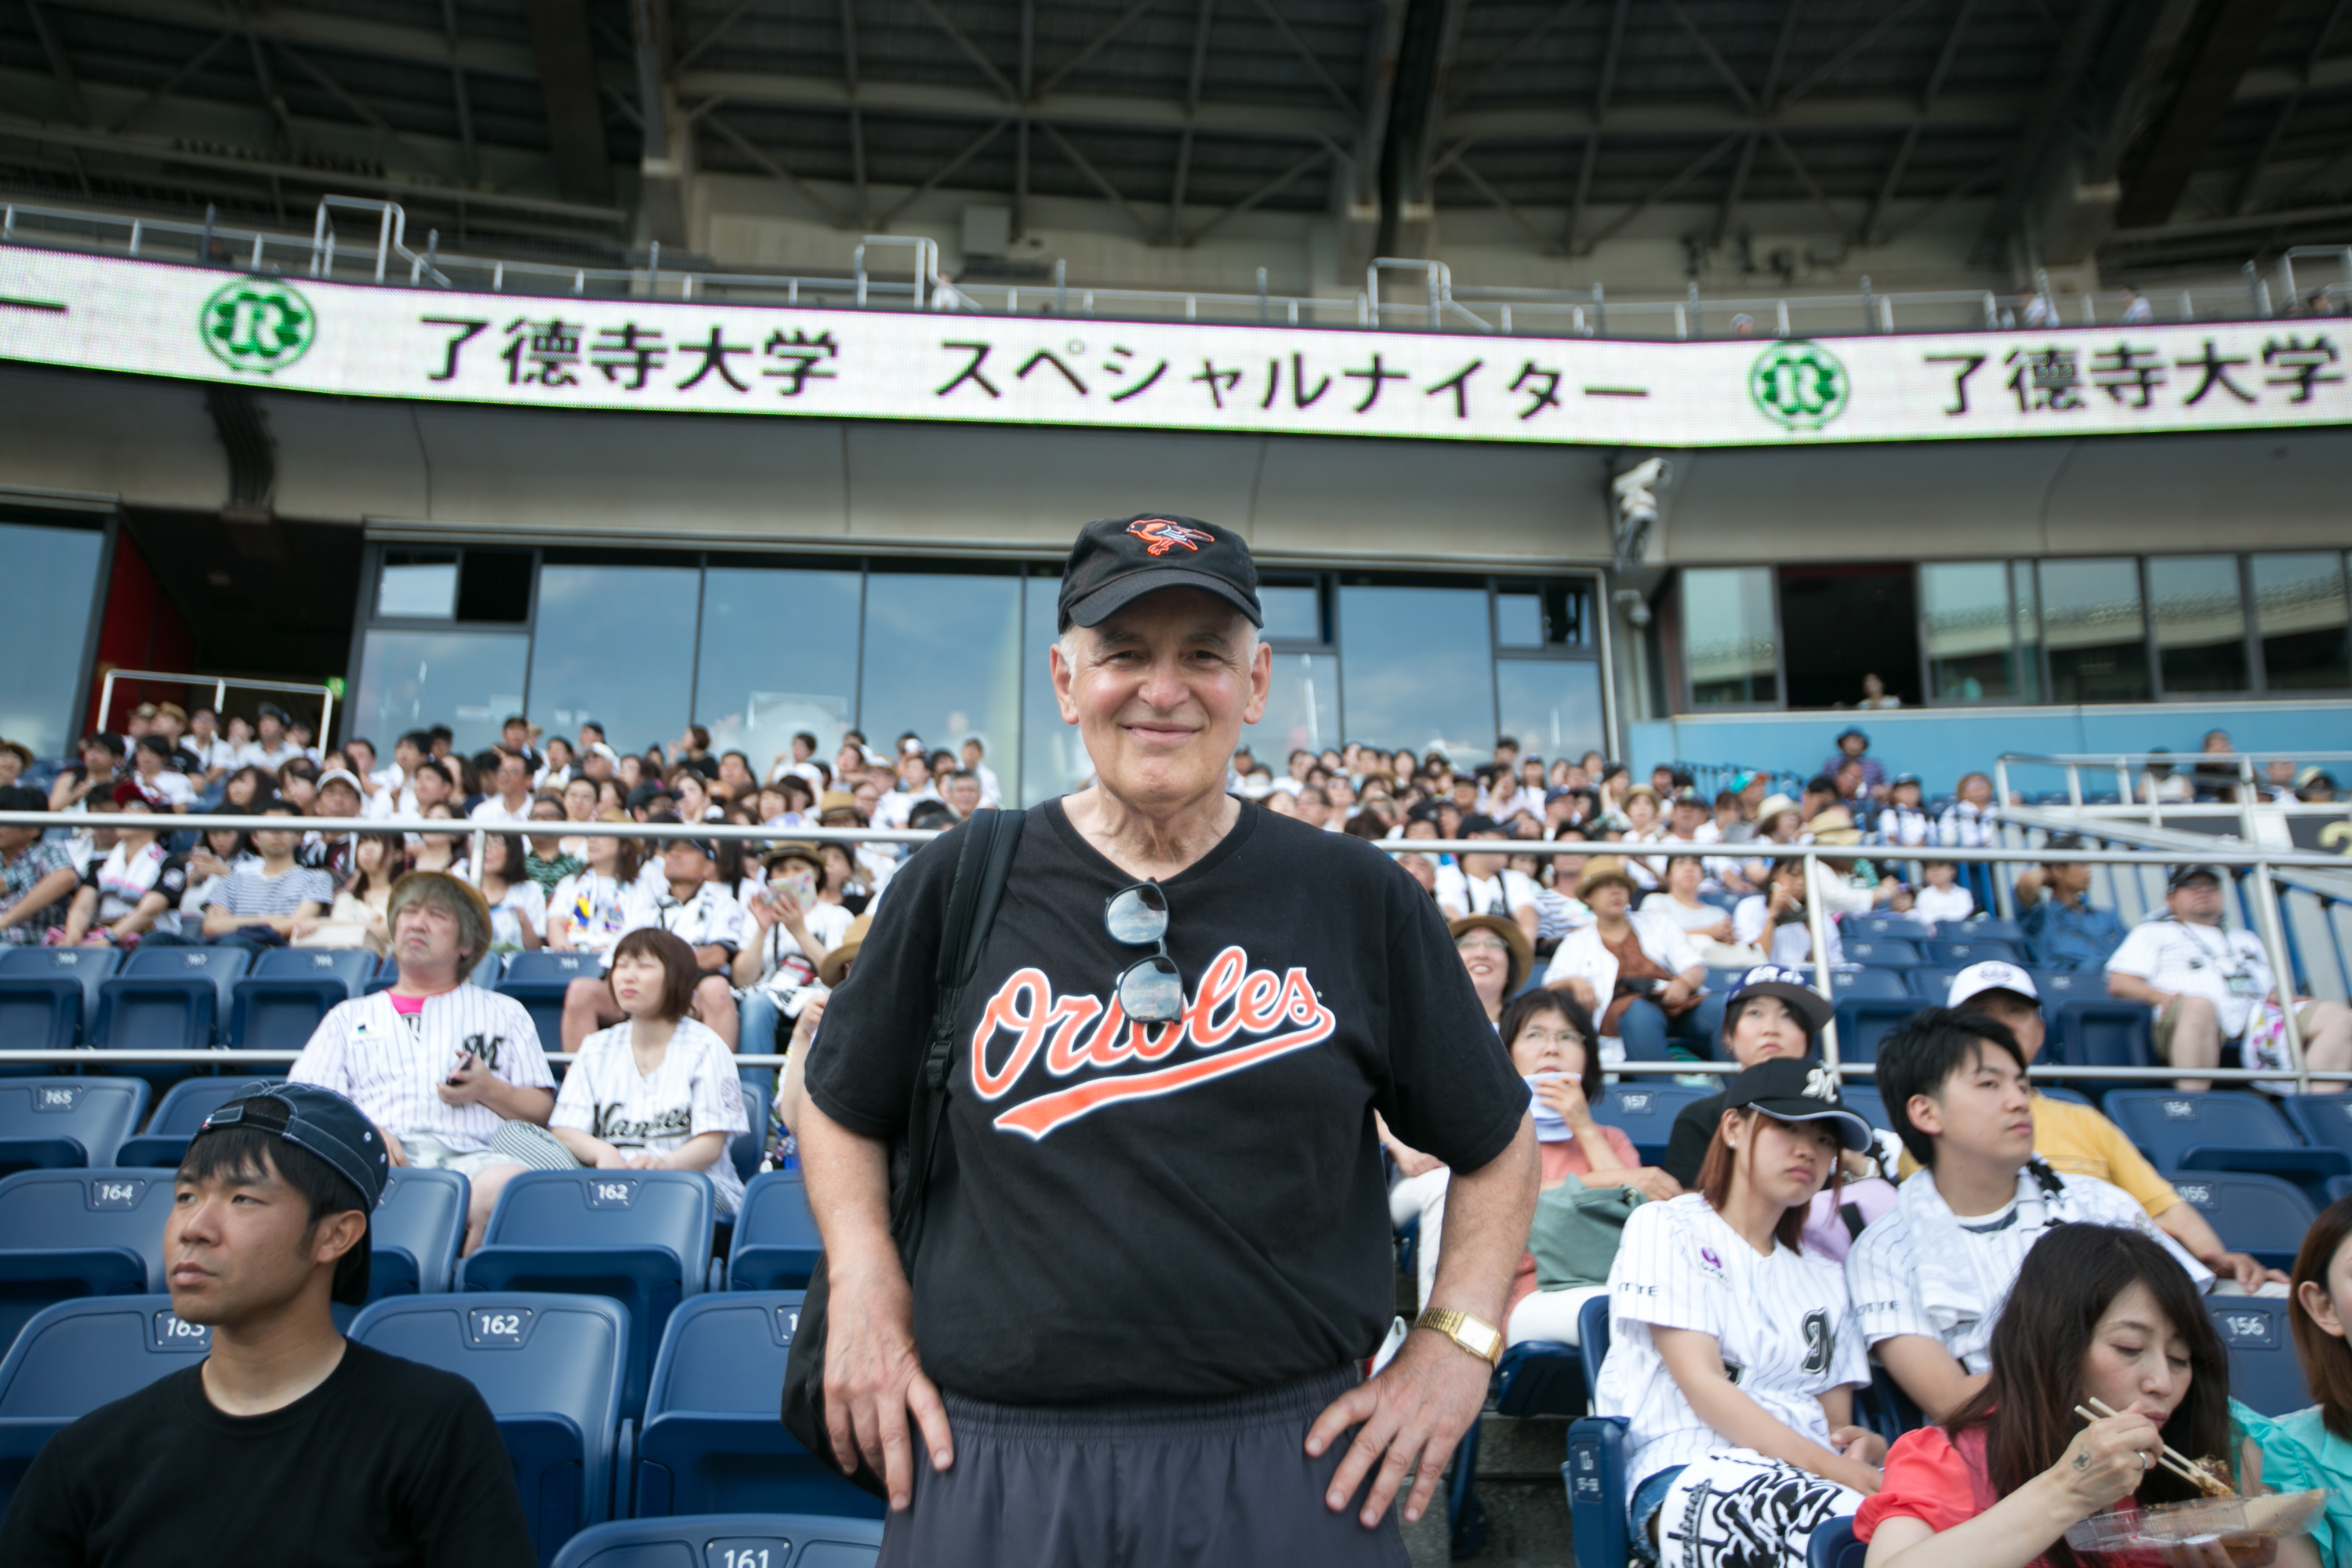 Steven Wisensale, professor of human development and family studies, watches a baseball game in Japan. (Chris Moore for UConn)